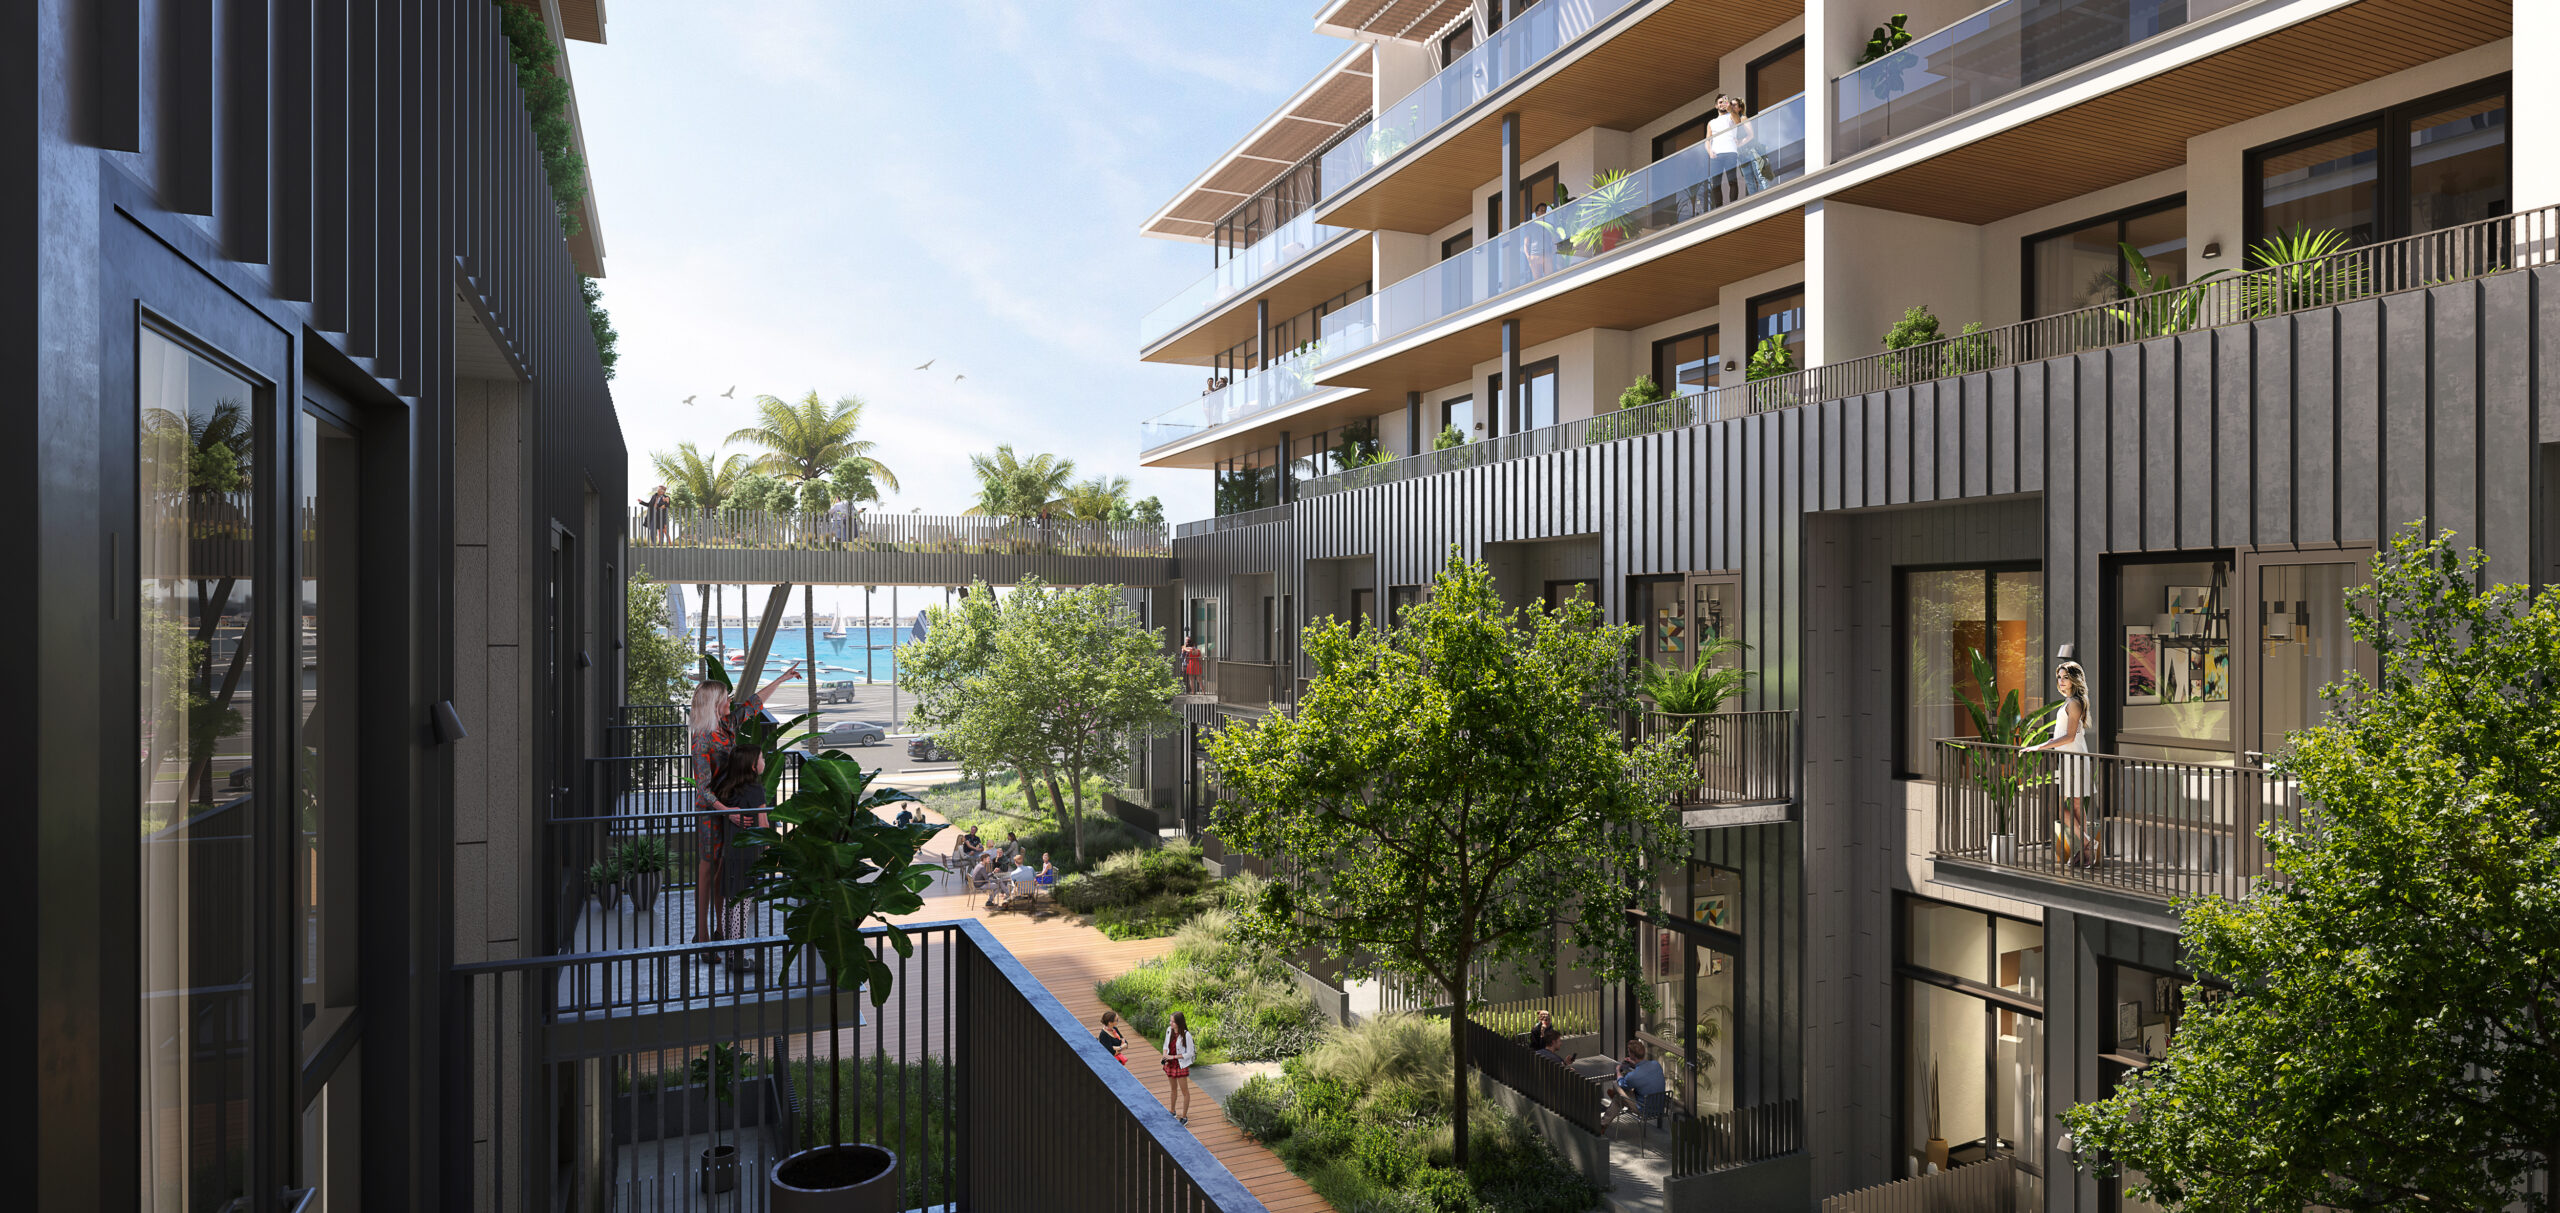 Courtyard at SCB's Marina Shores. Architecture. Residential. Planning and Urban Design. Urban Design.